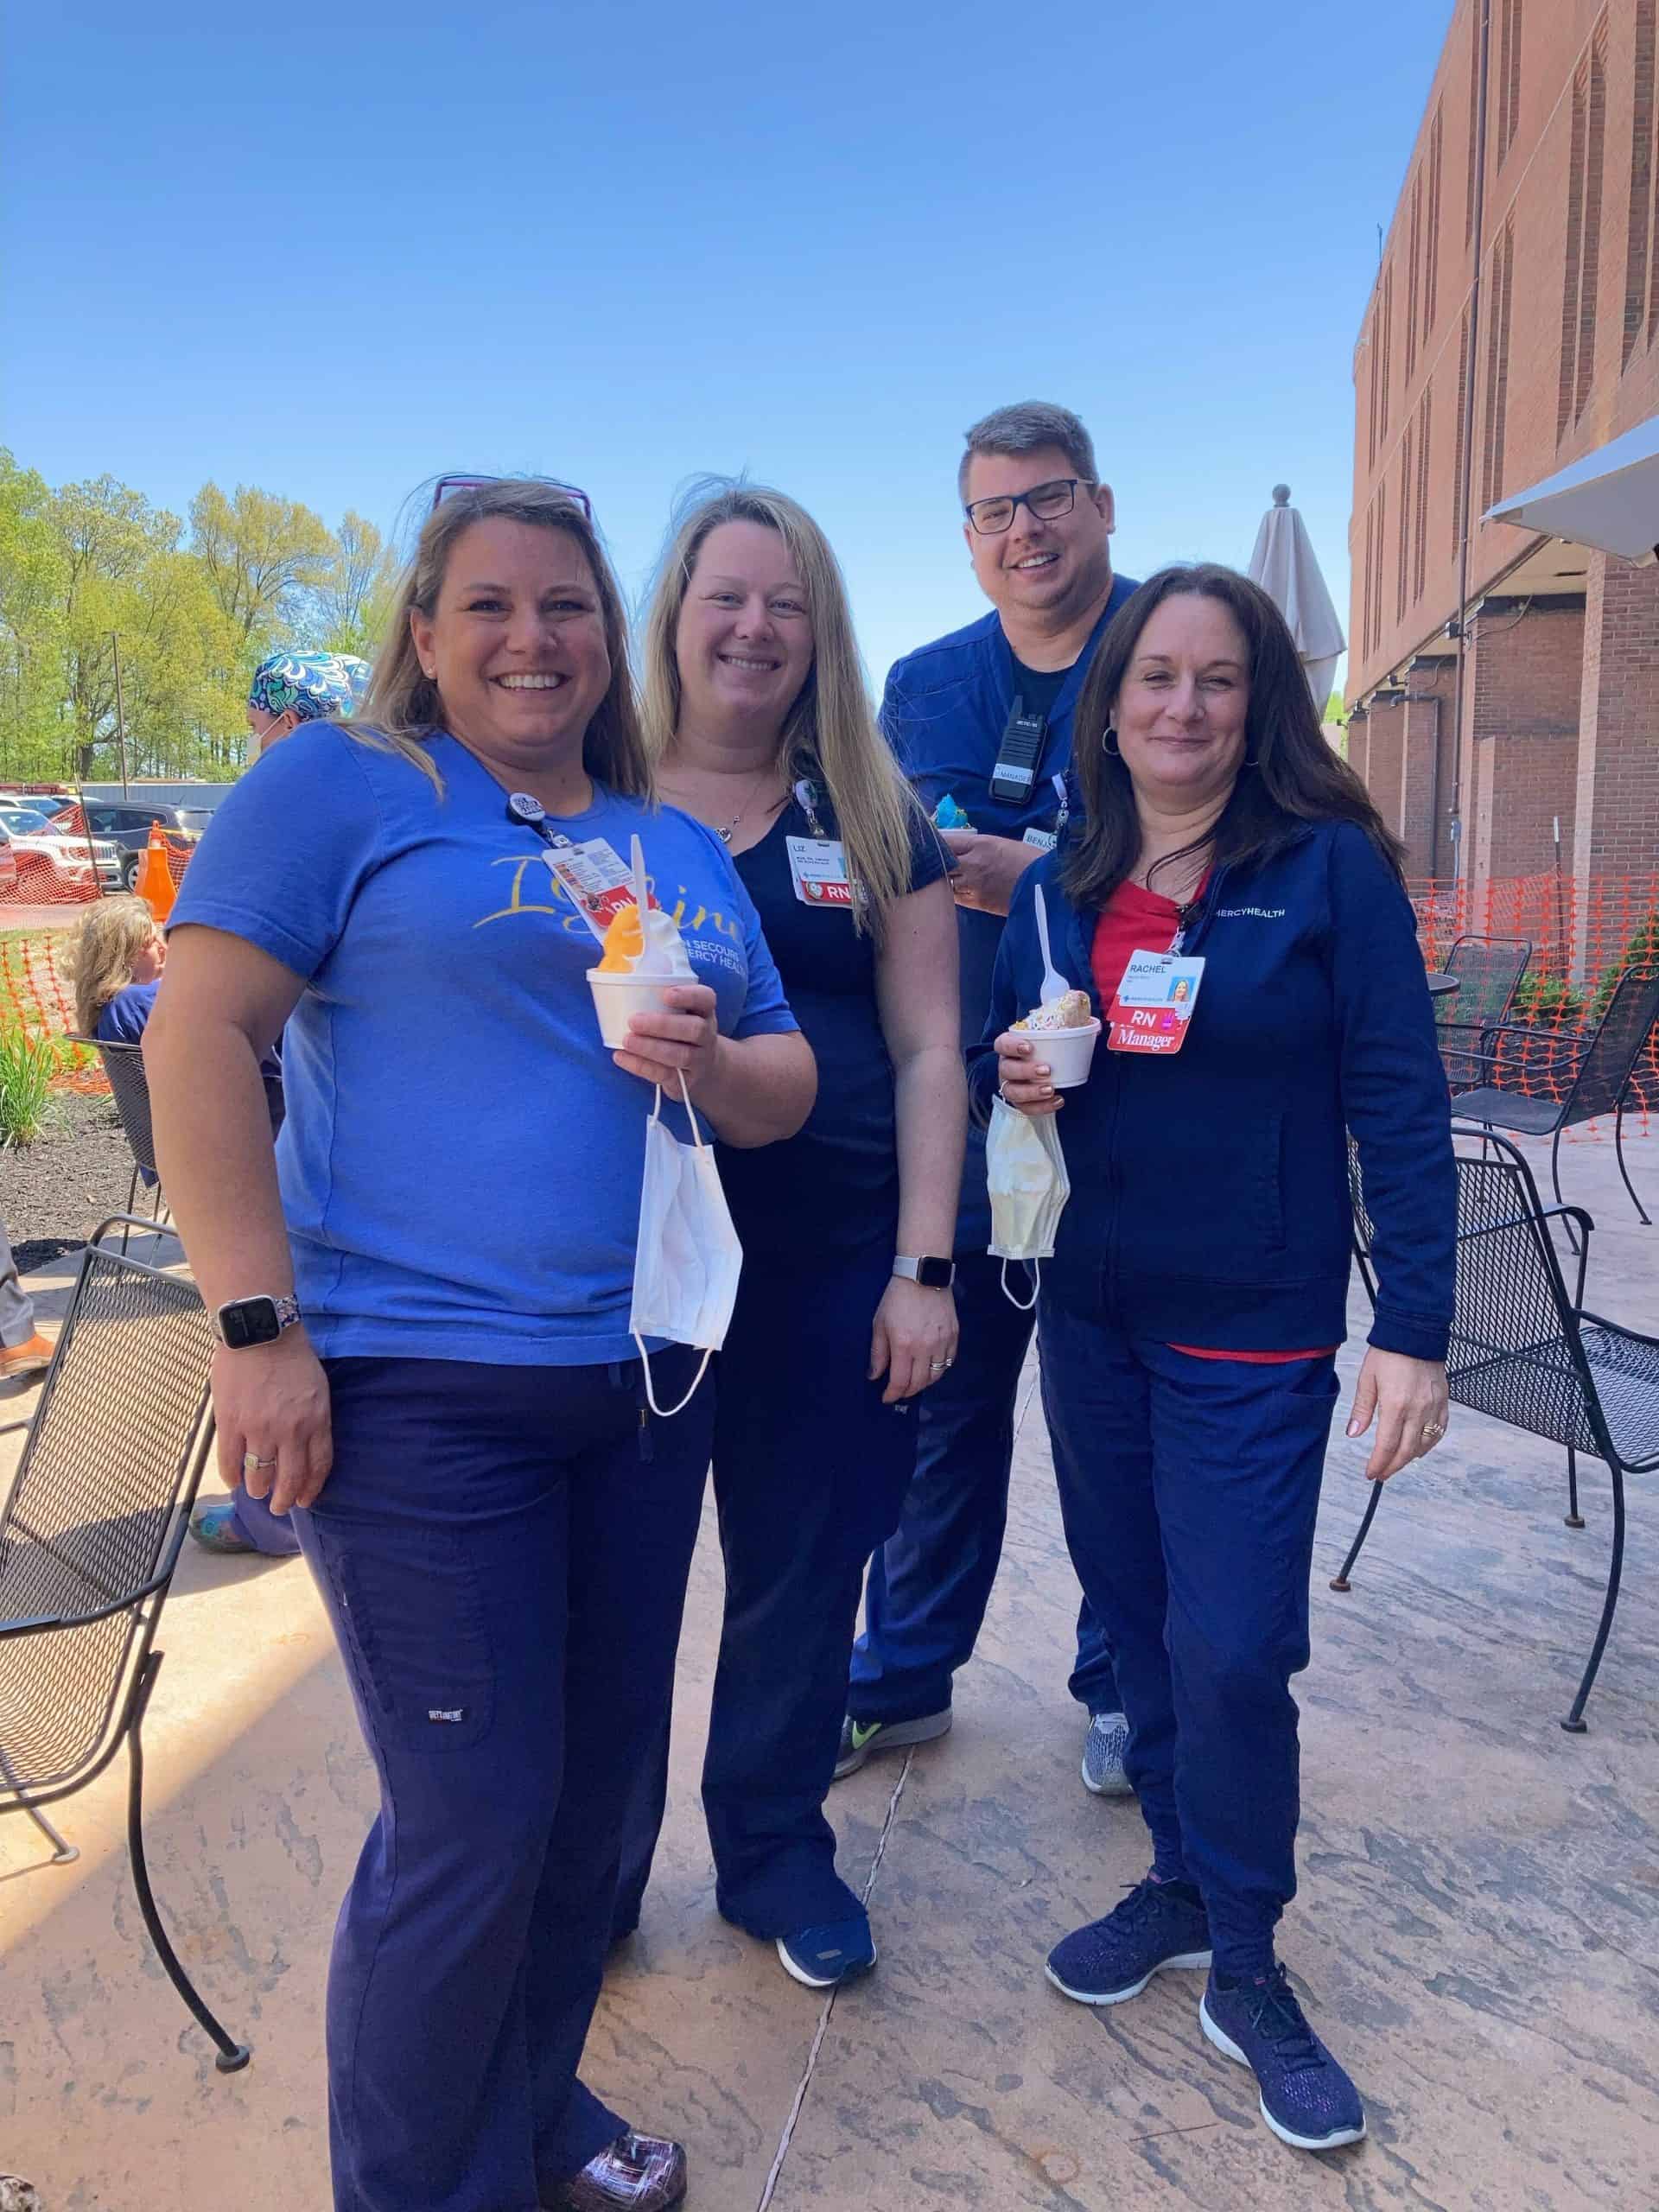 Group event to get ice cream during Nurses Week